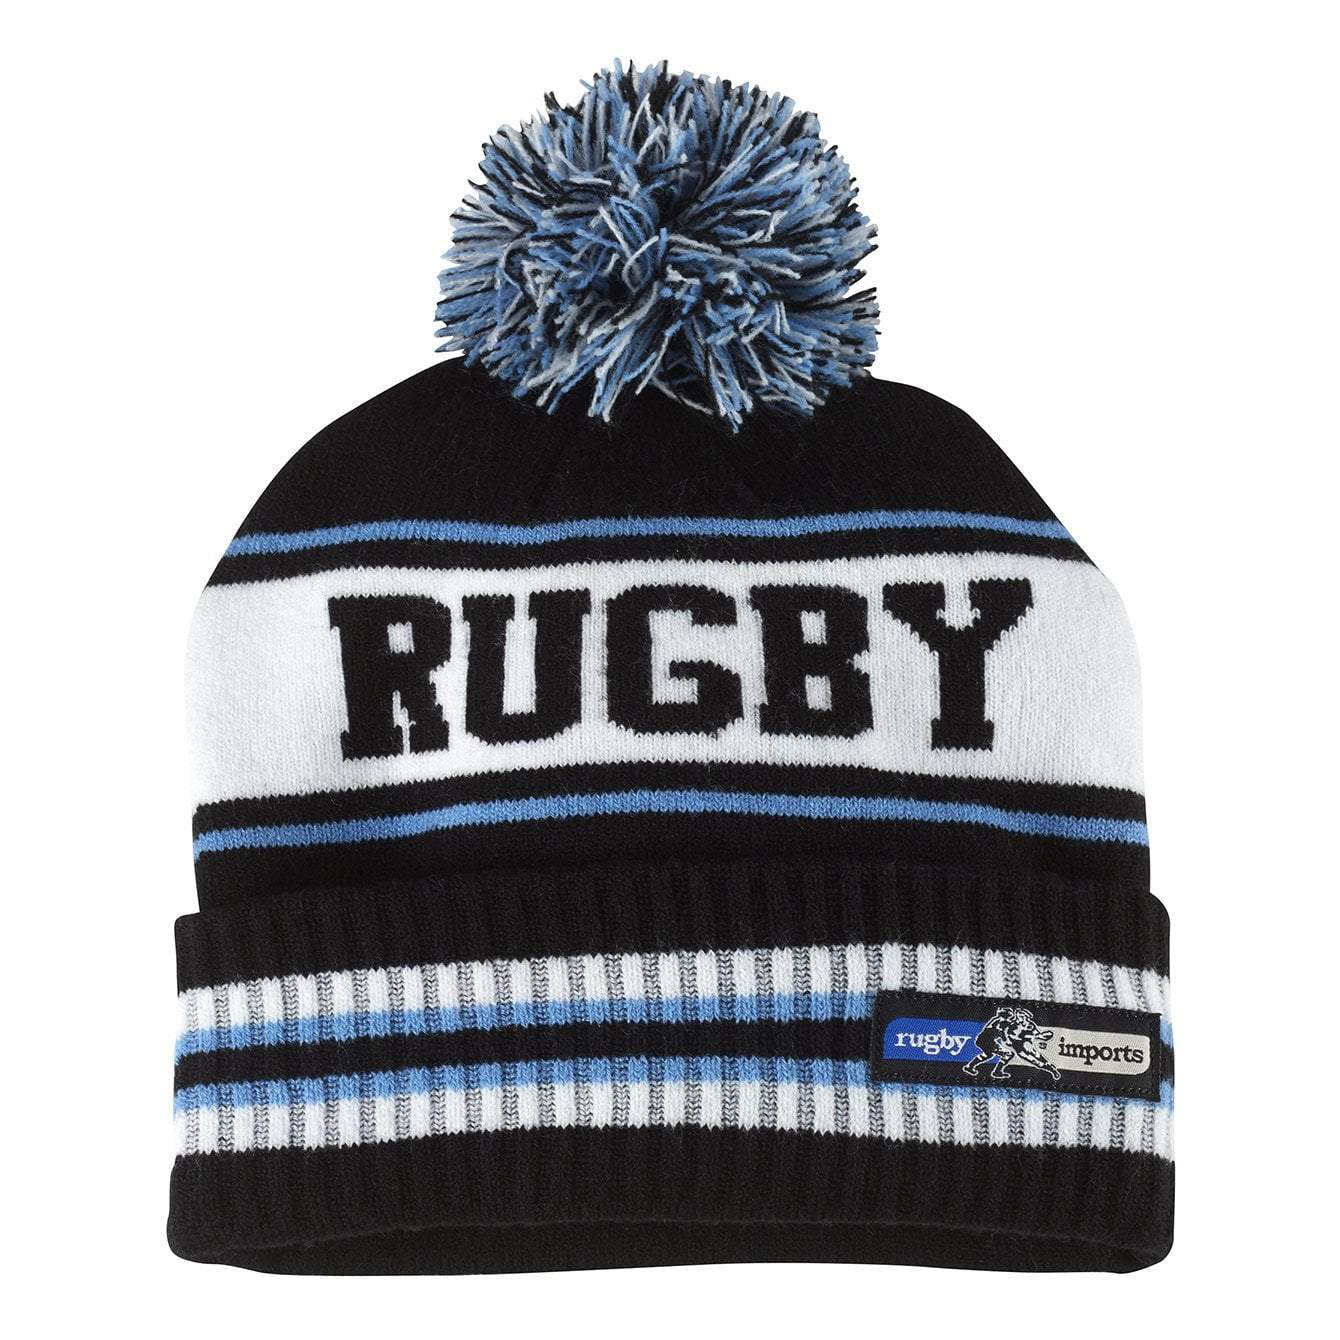 Rugby Imports Rugby Imports Pom Beanie